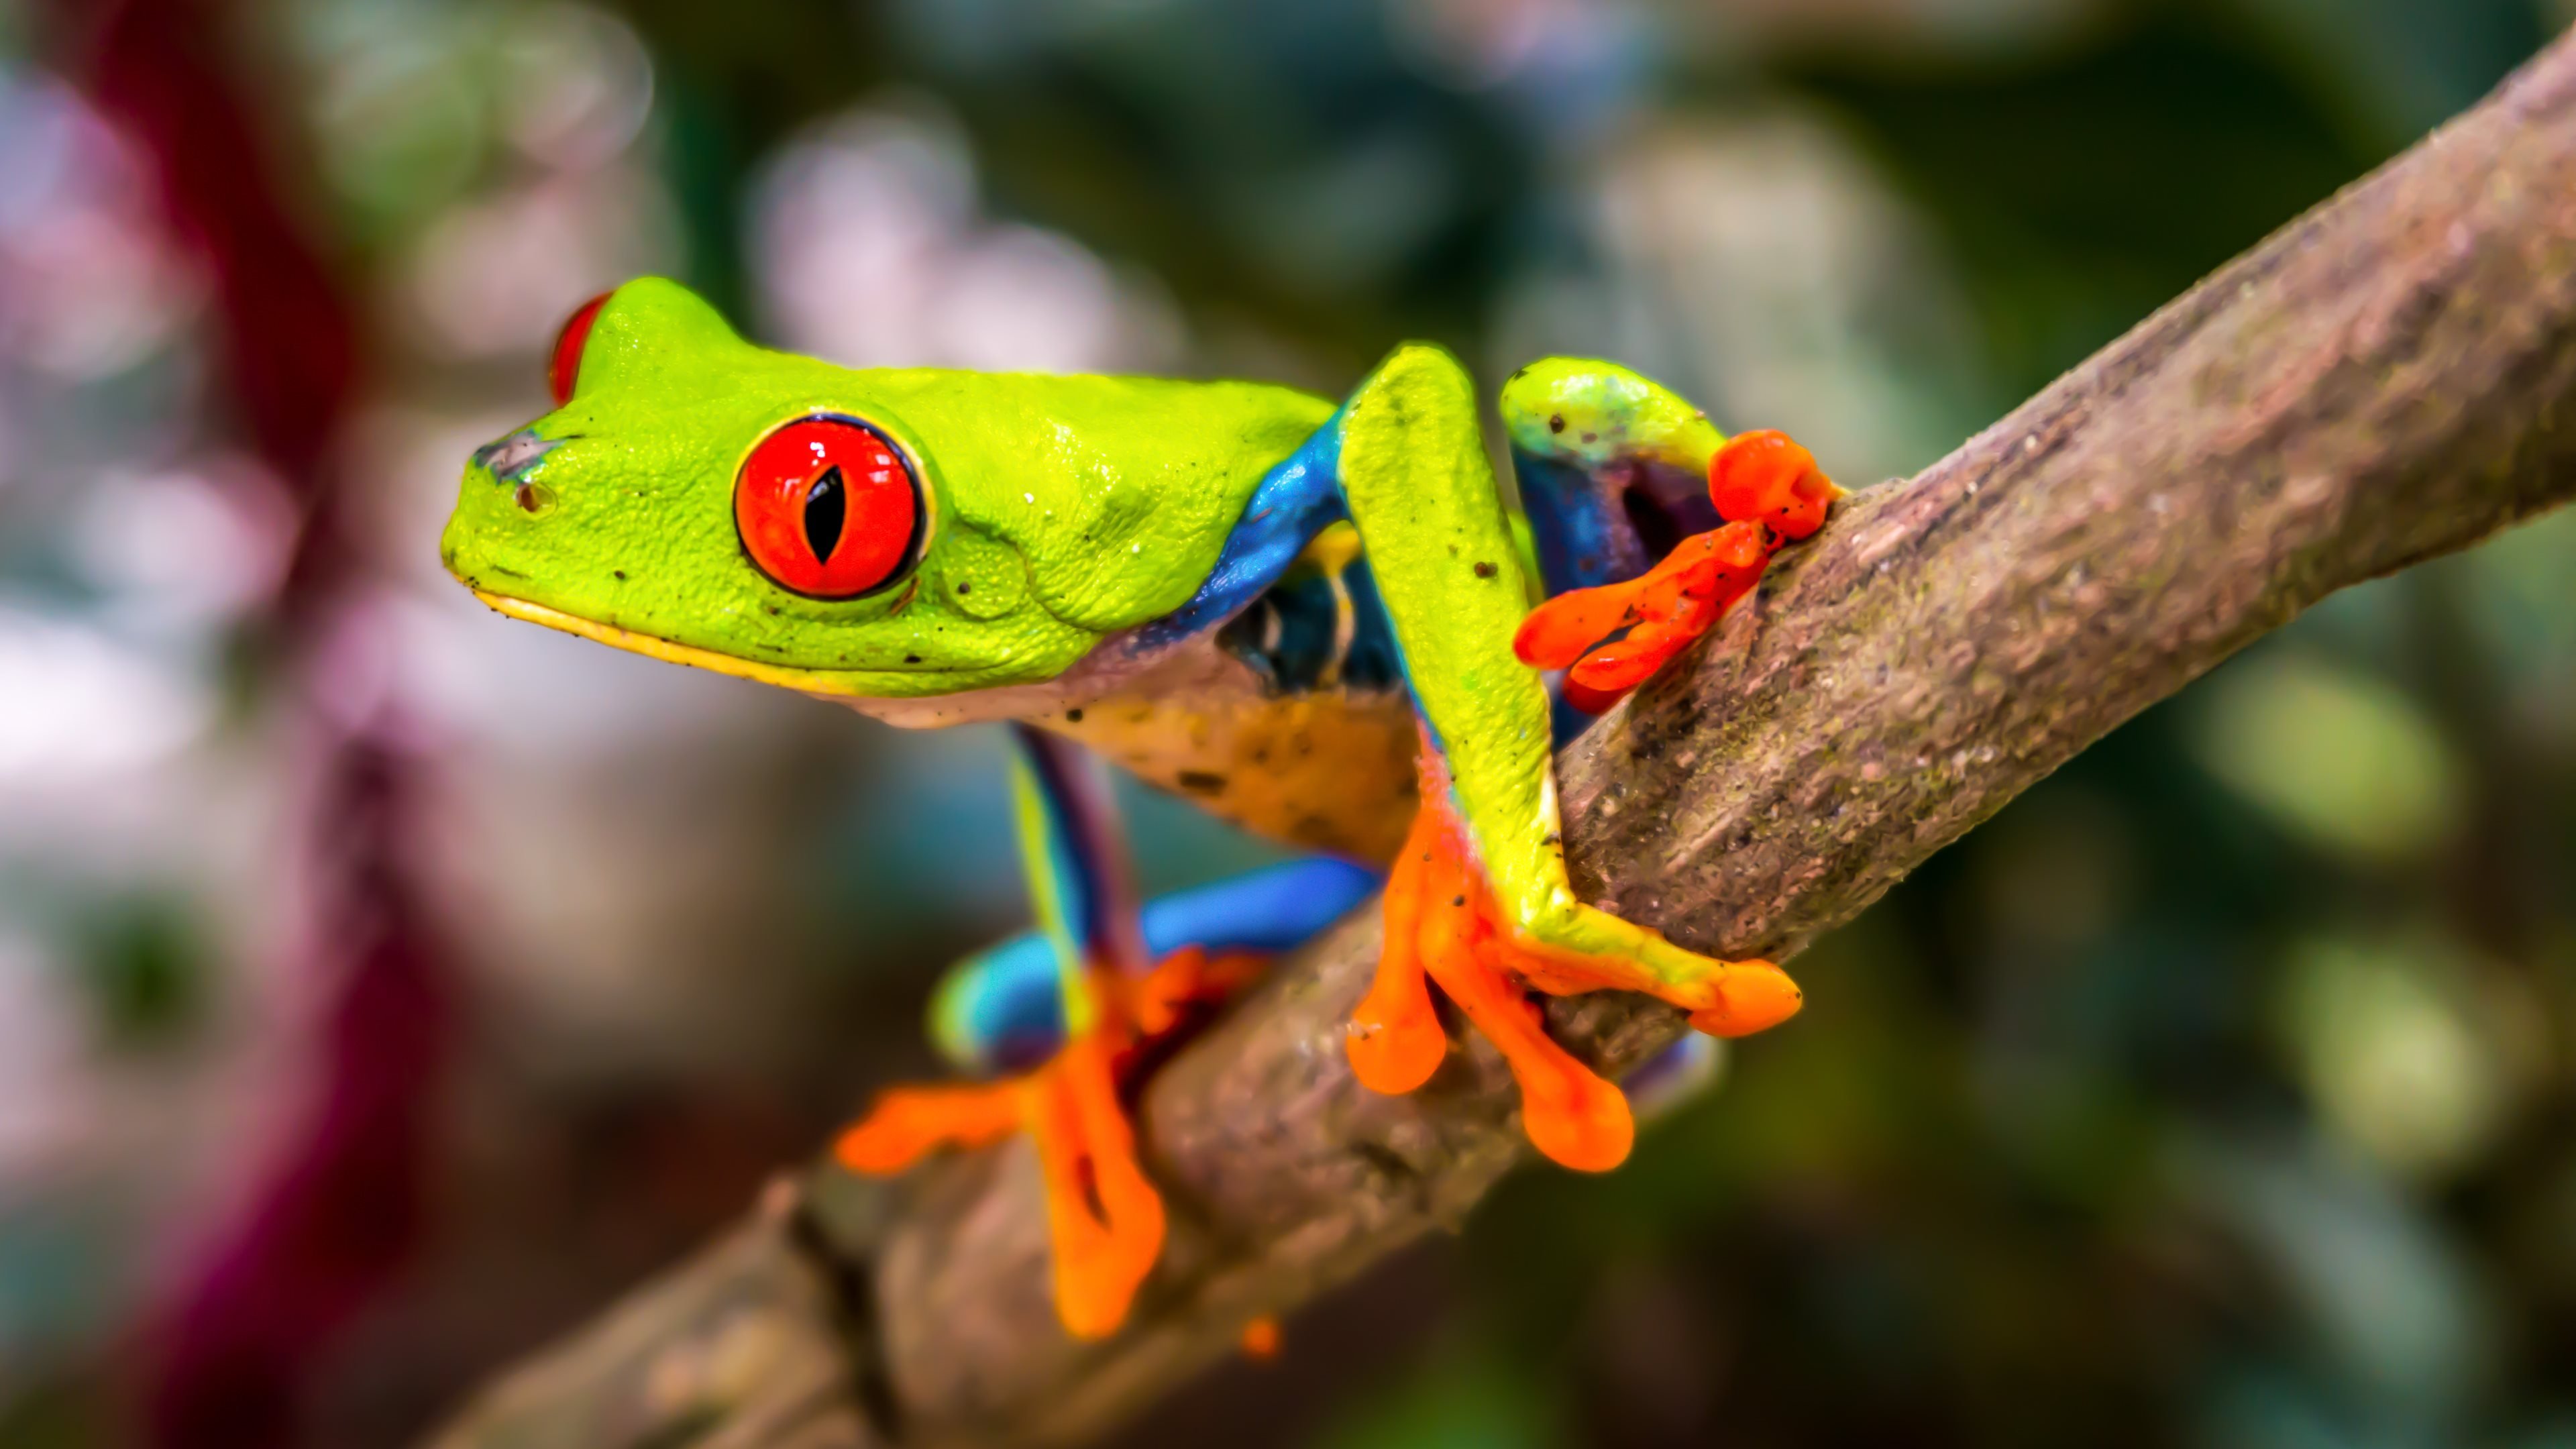 frog wallpapers, photos and desktop backgrounds up to 8K [7680x4320